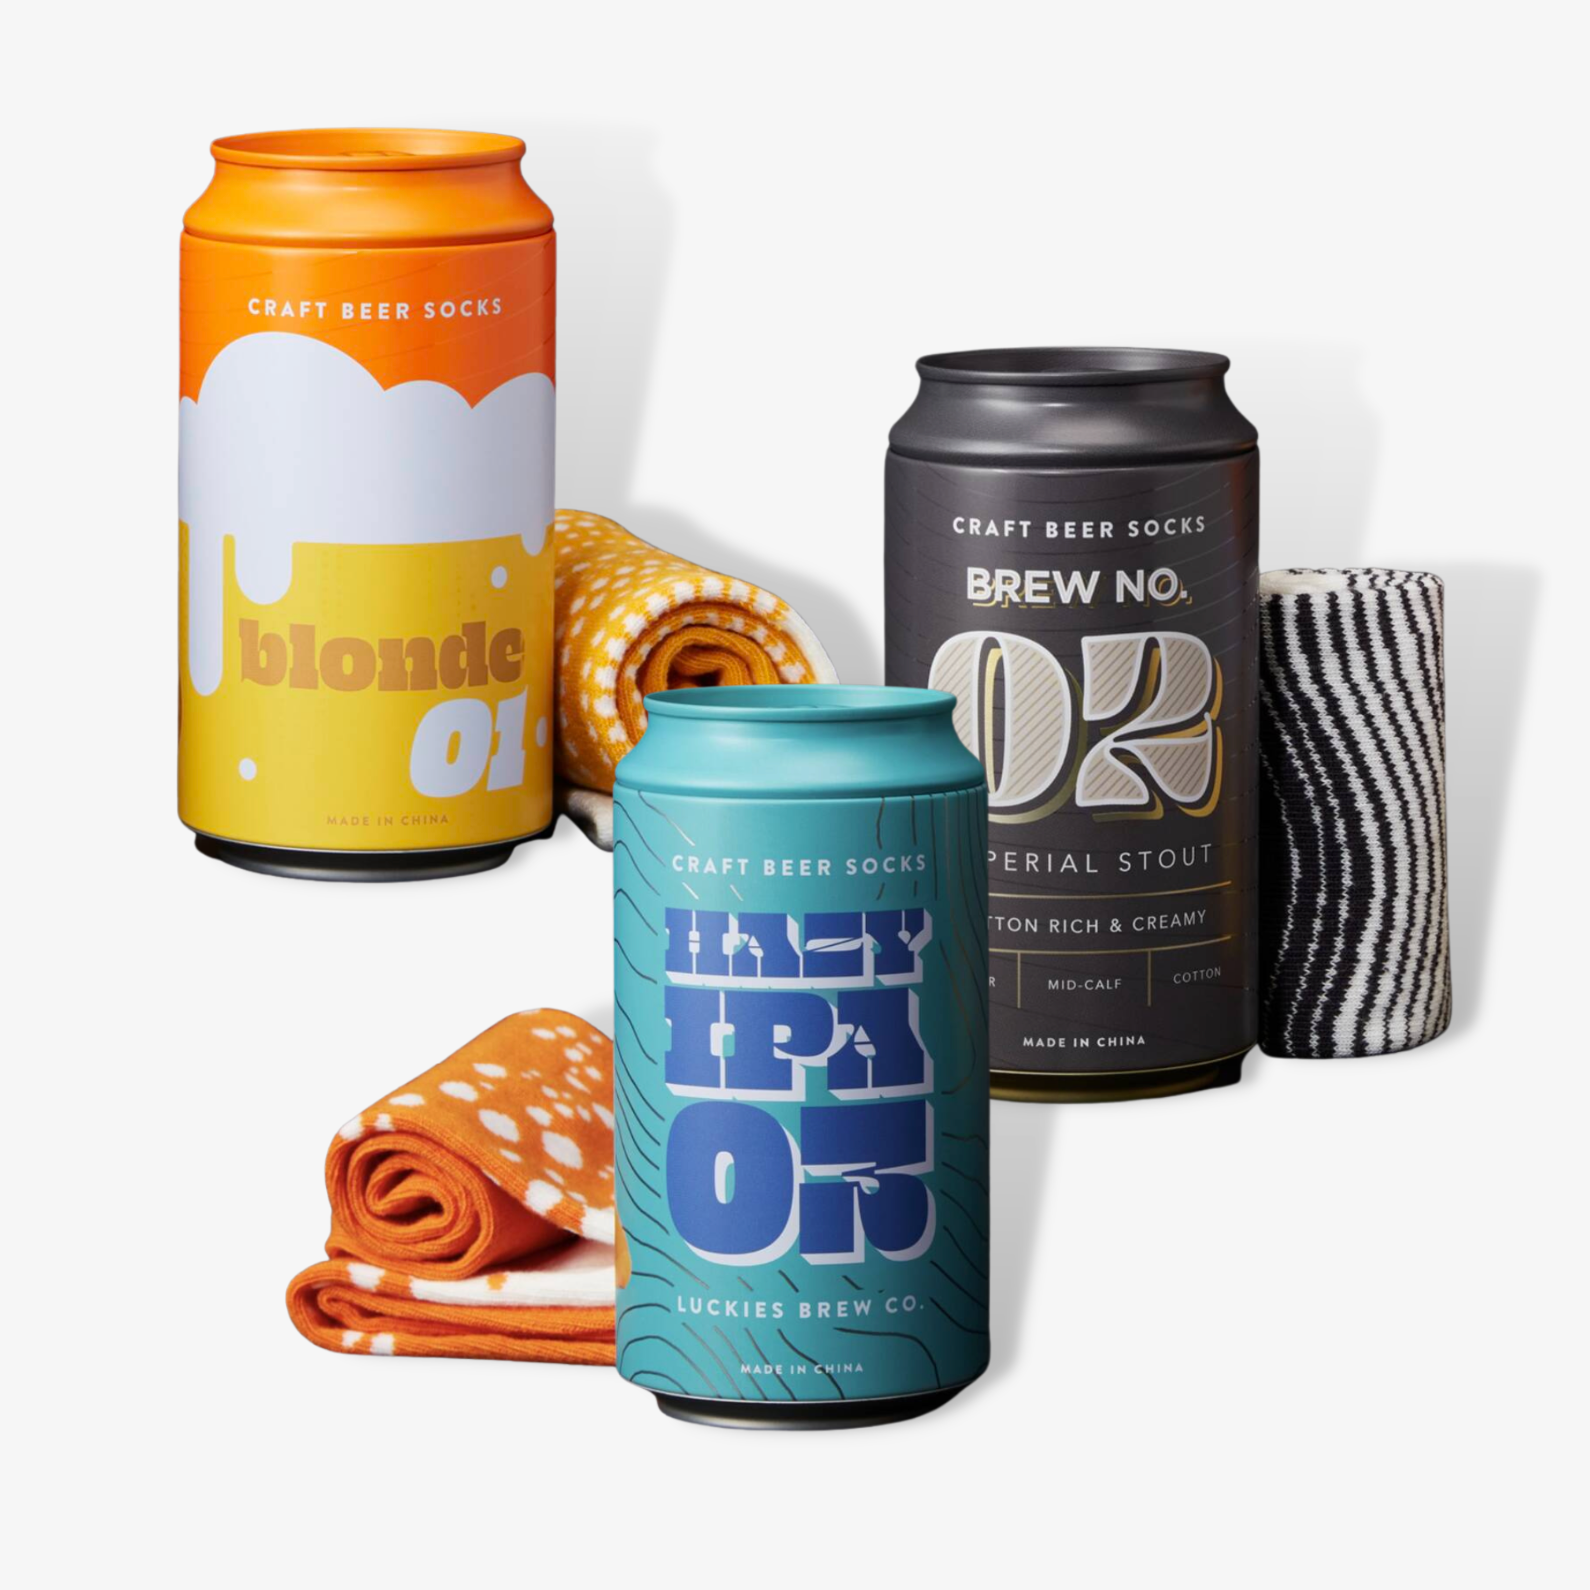 Craft Beer Socks In A Can